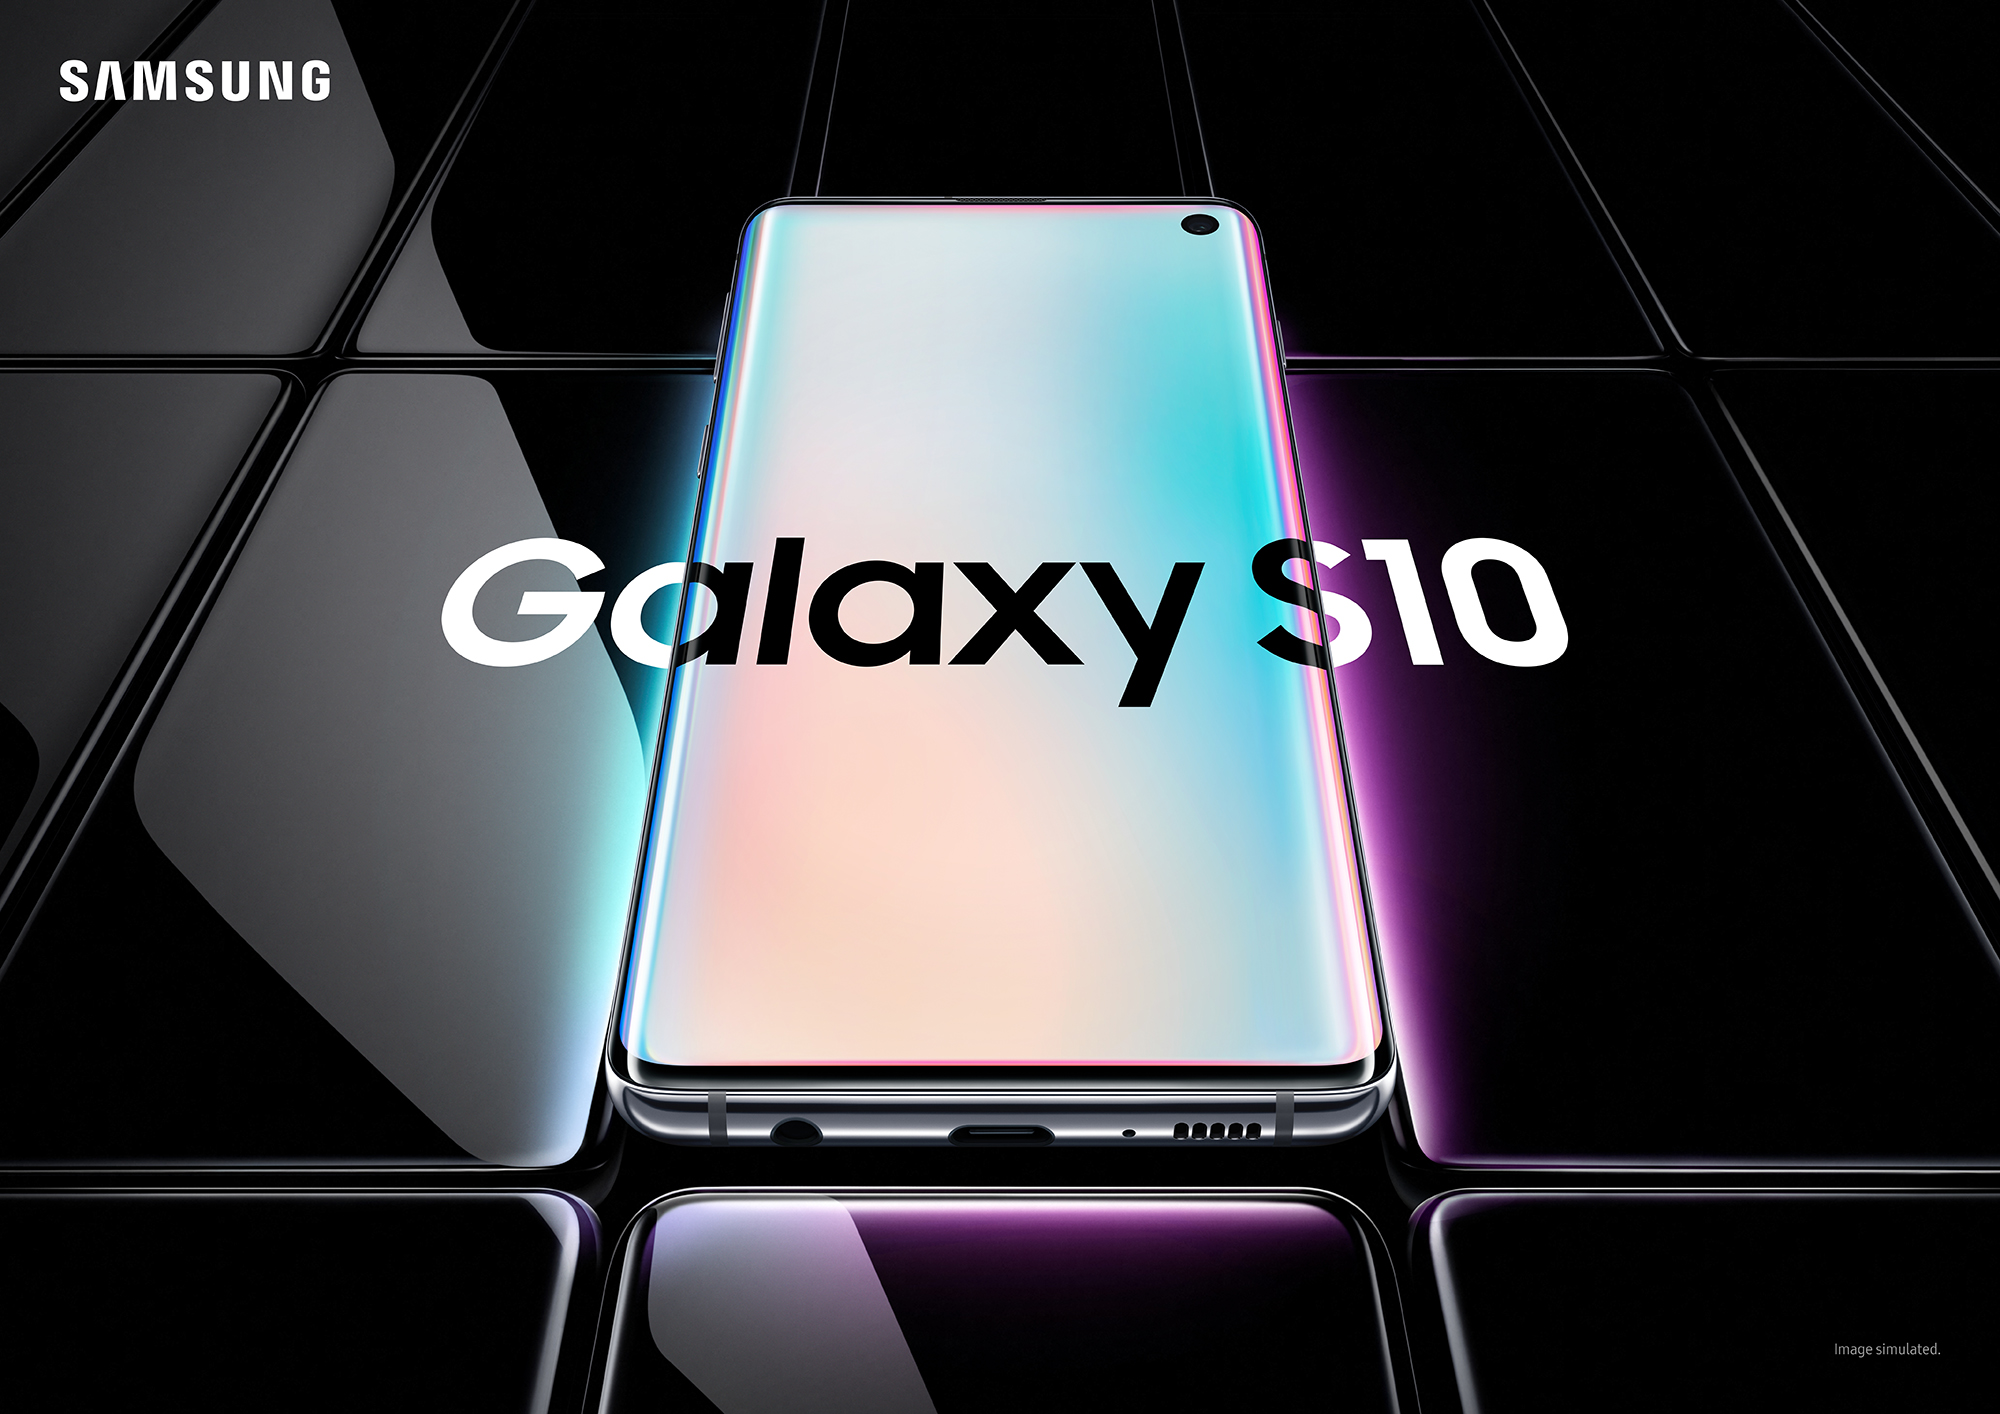 Android 10 update arrives on Samsung Galaxy S10